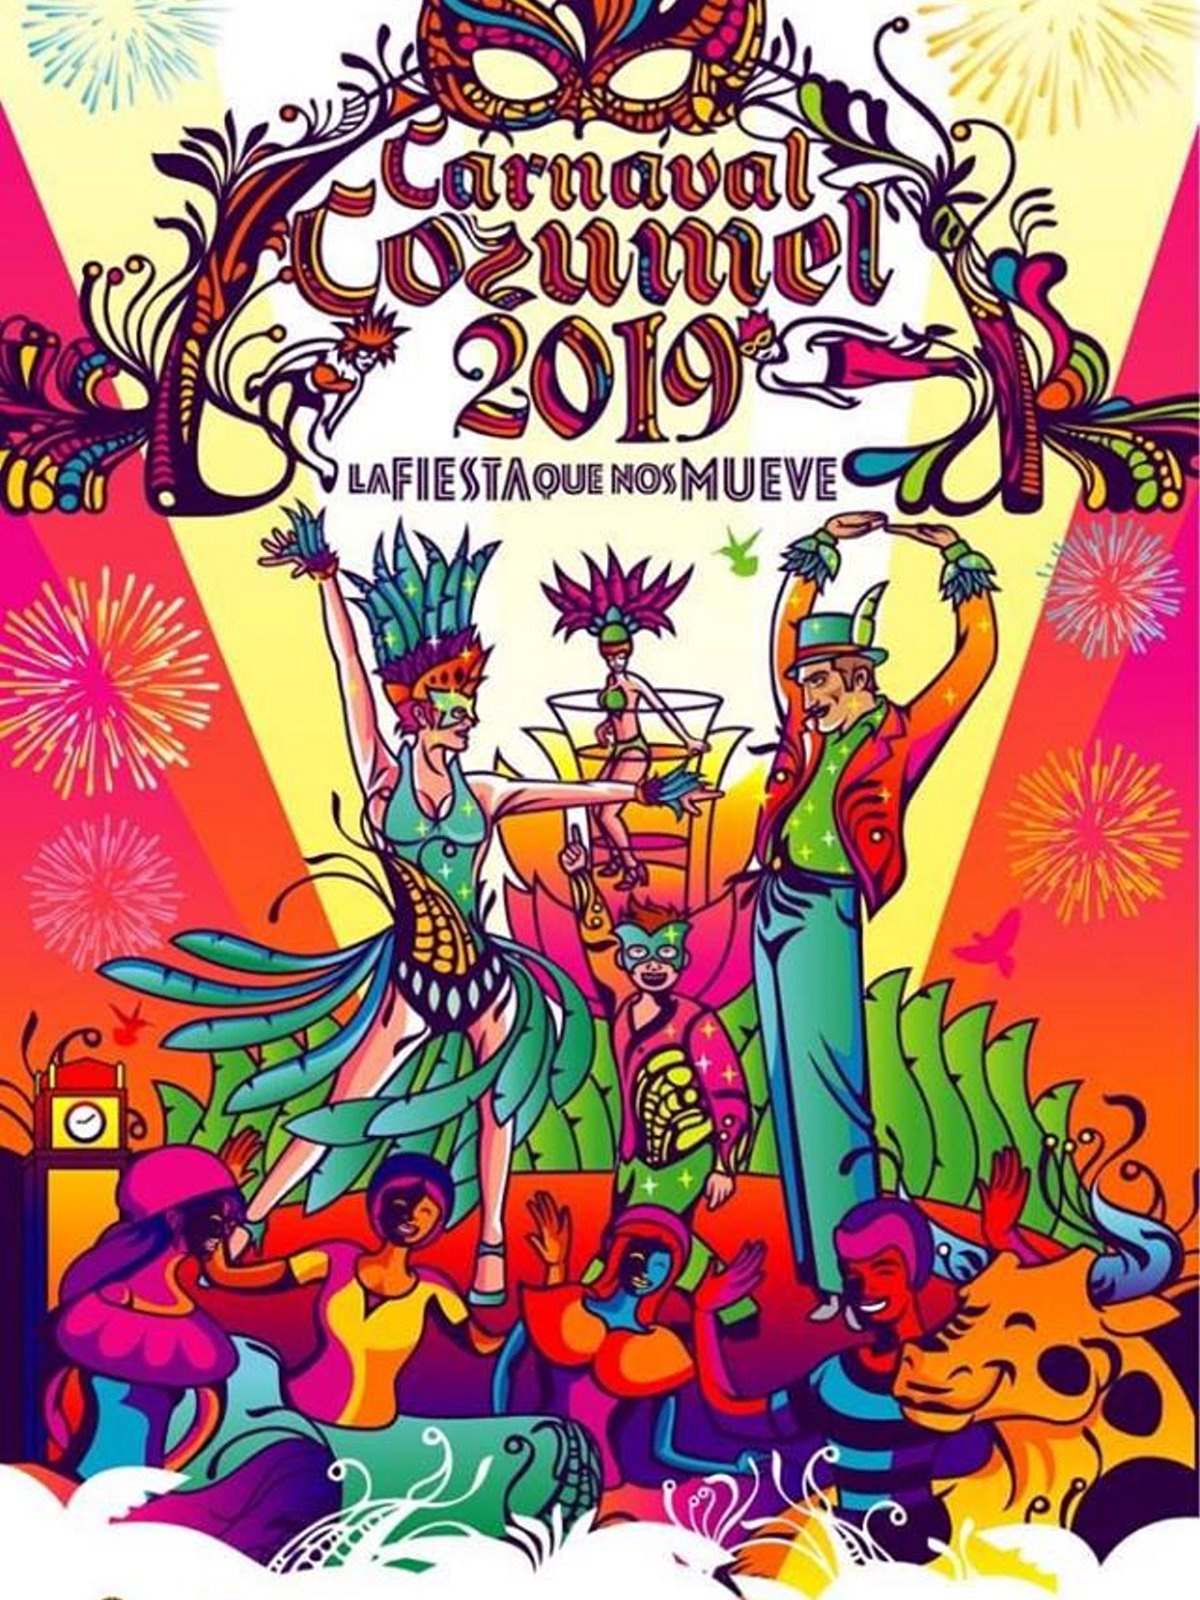 Carnaval 2019 Official Poster